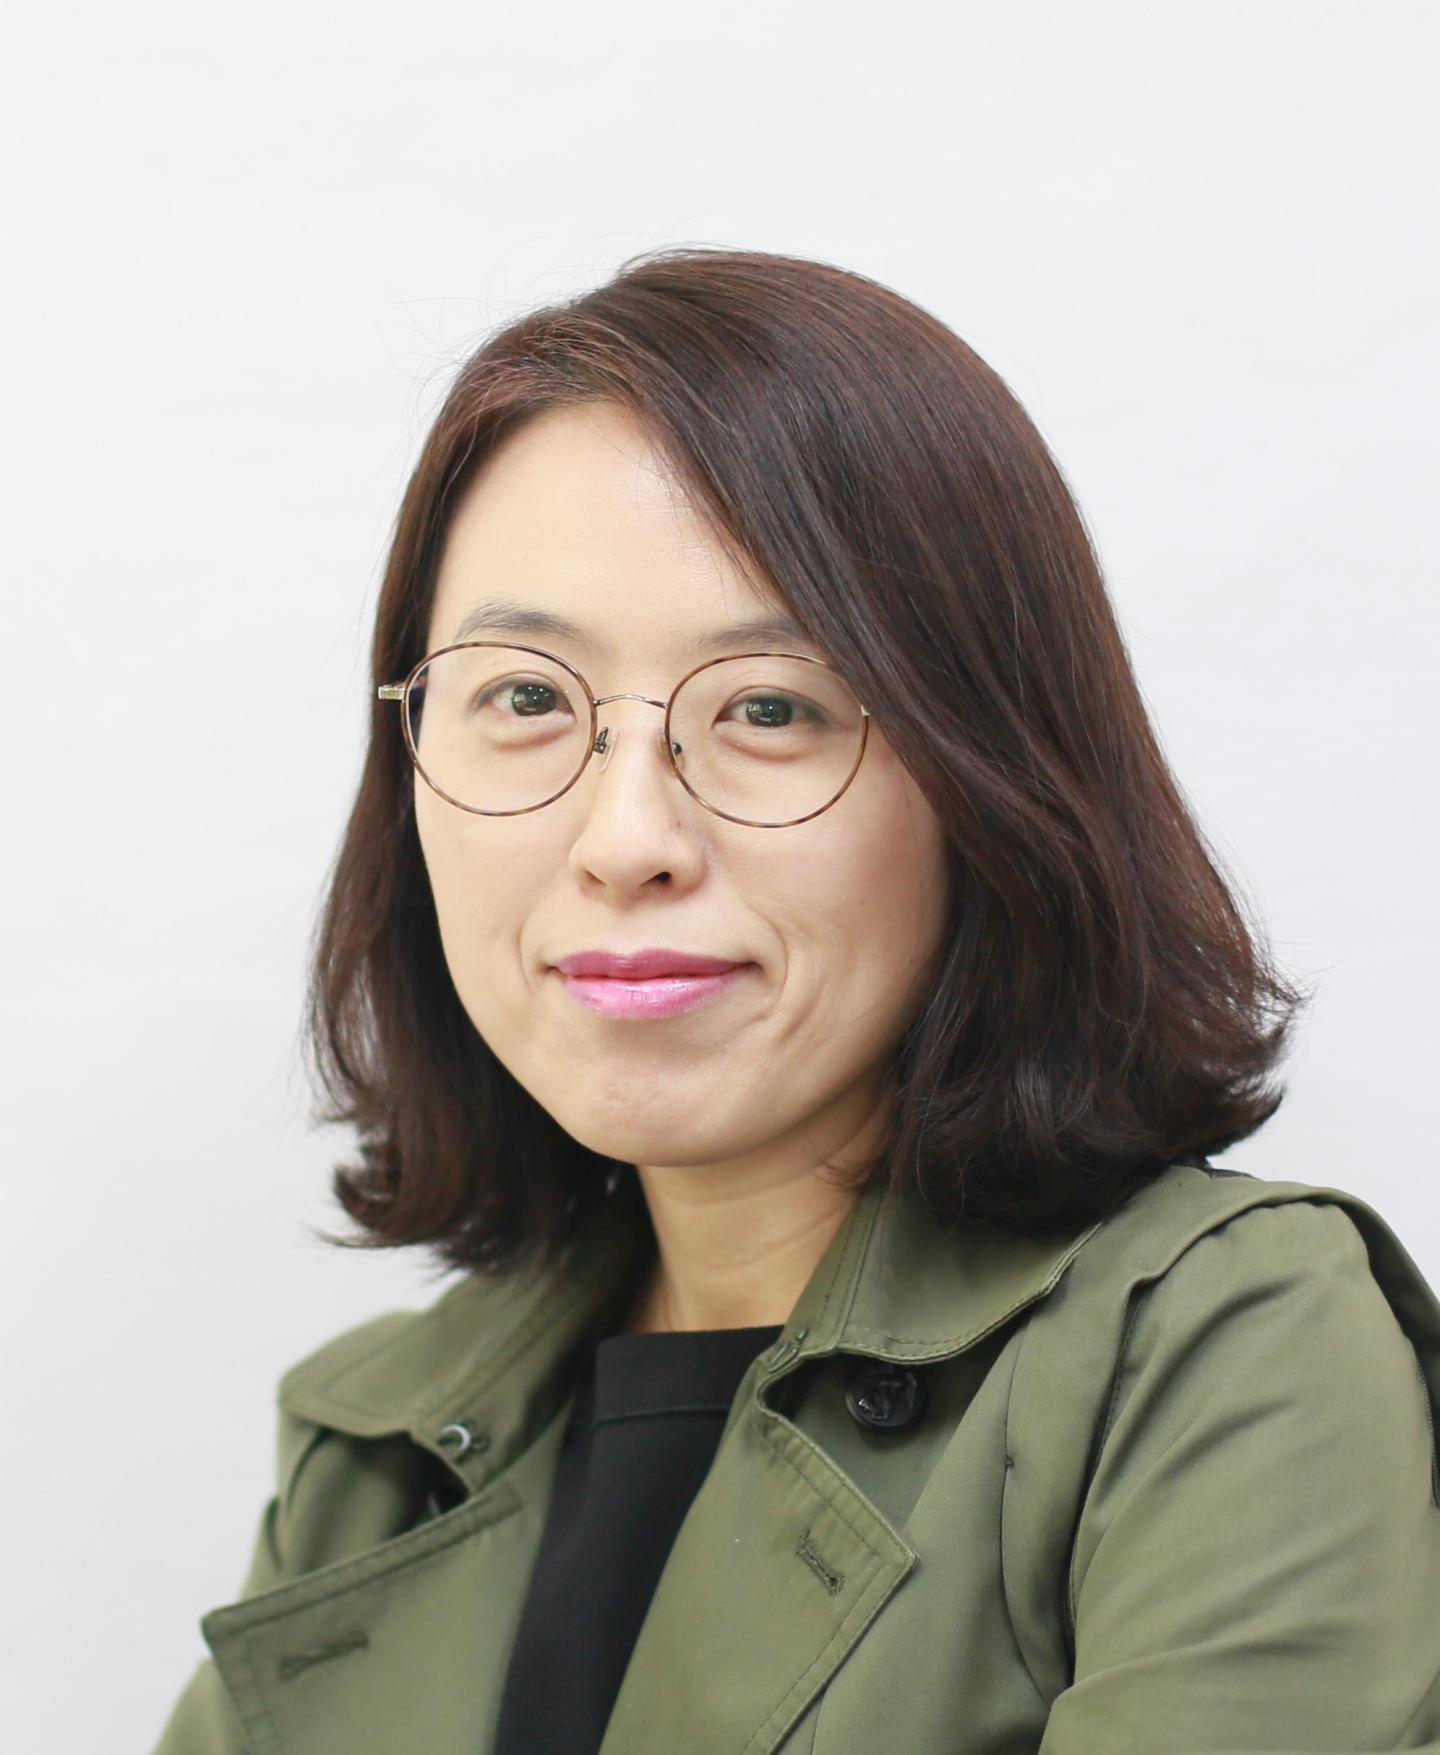 Dr. Eun Mi Hwang, Korea Institute of Science and Technology